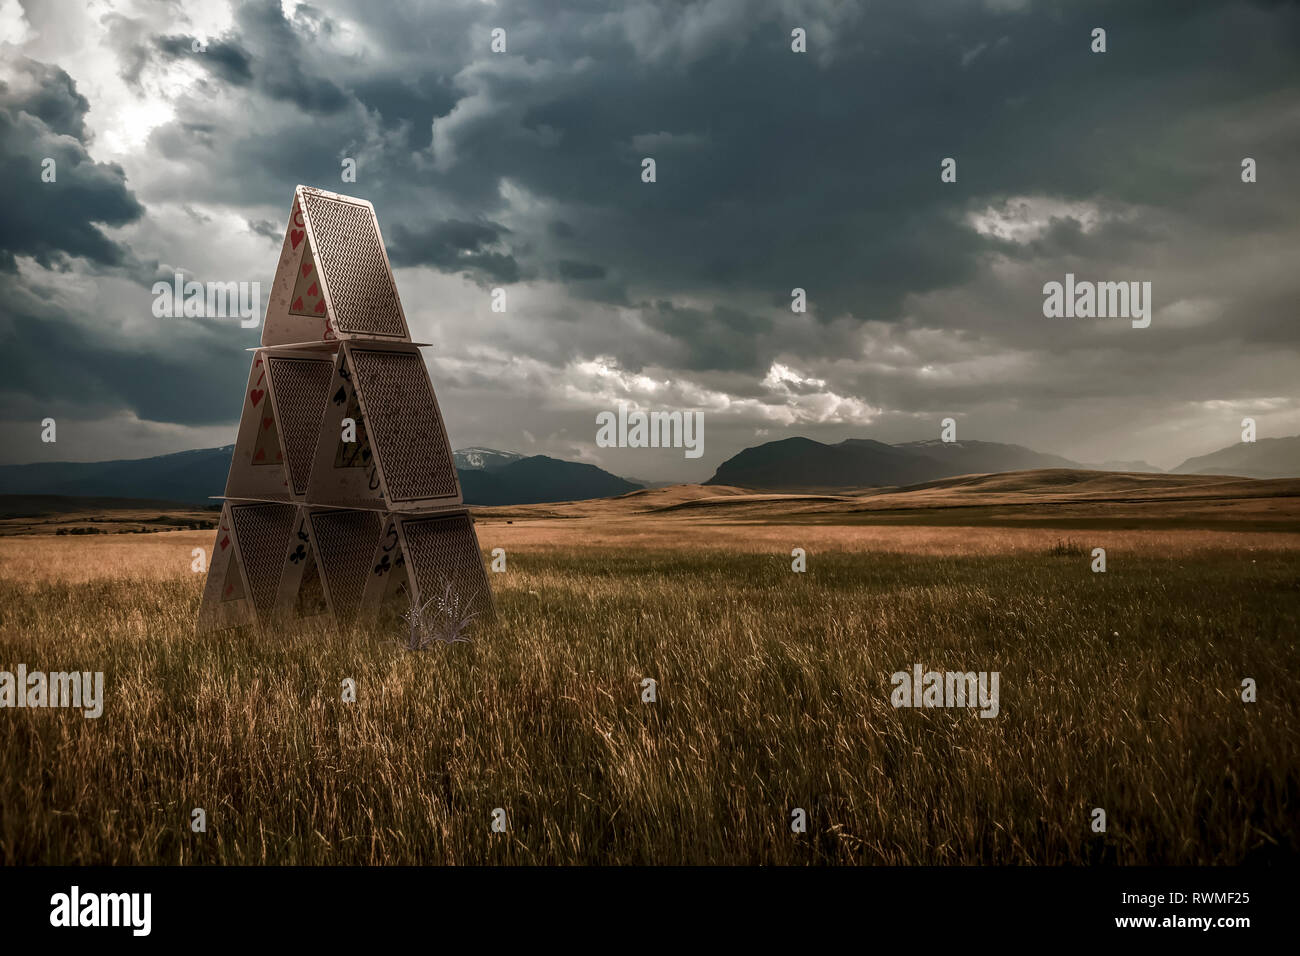 Playing cards set up in a grass field under a stormy sky, composite image Stock Photo